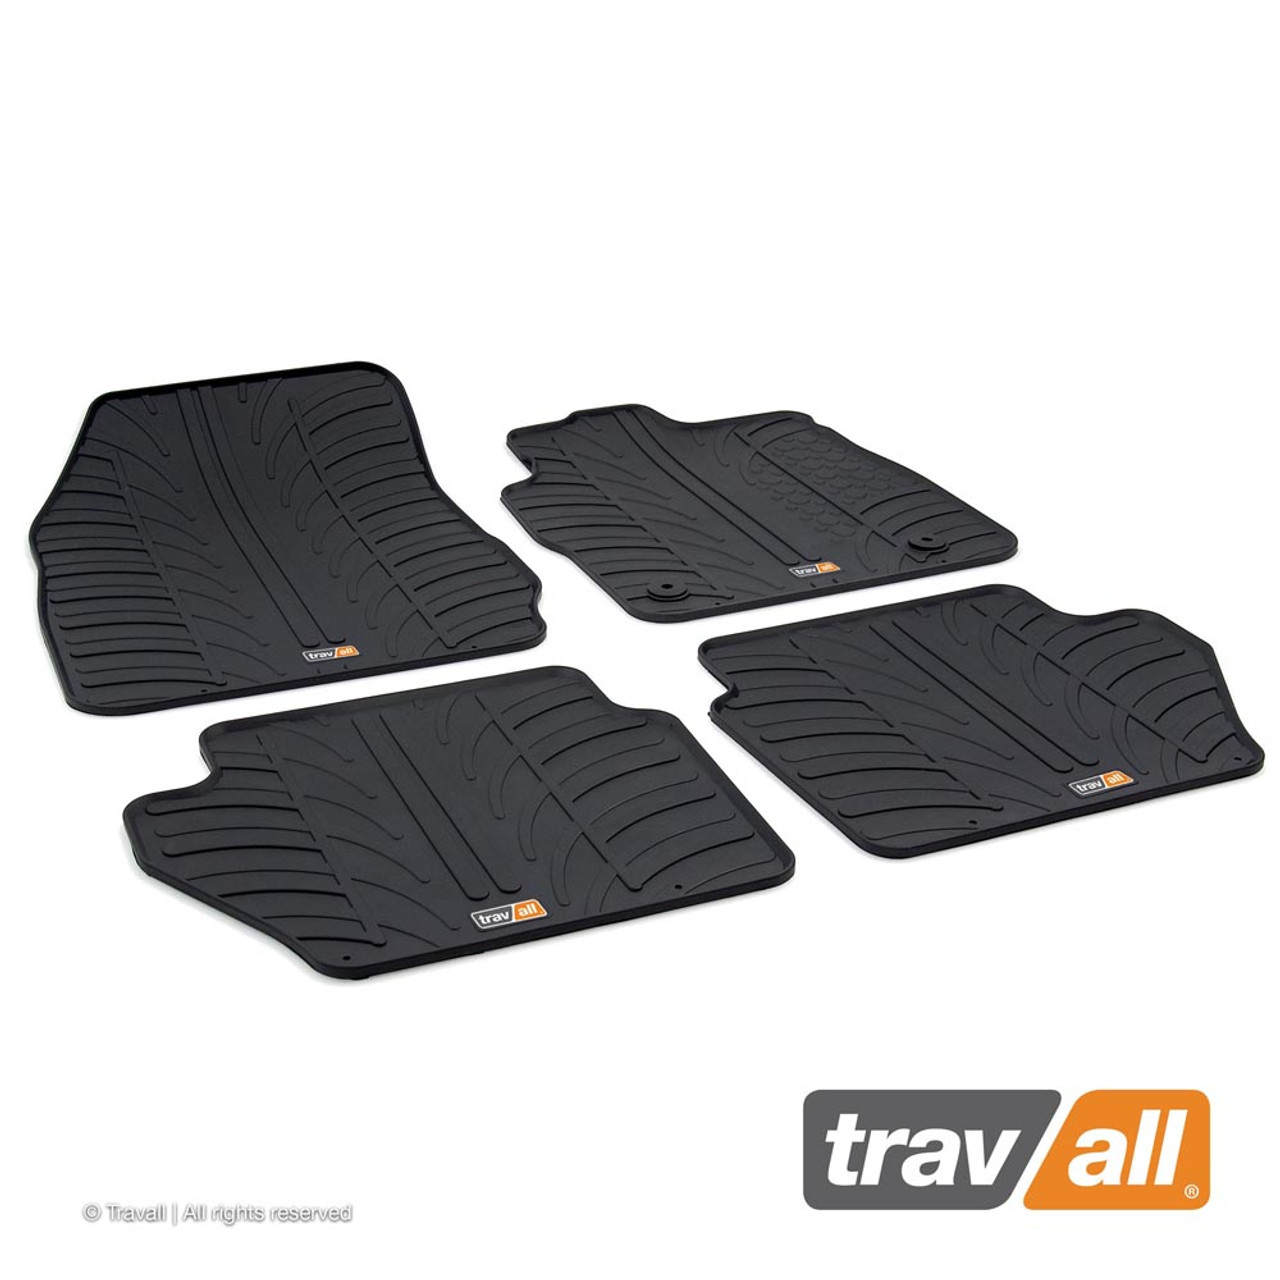 Custom Made Rubber Car Mats for Ford Fiesta 2008 to 2017